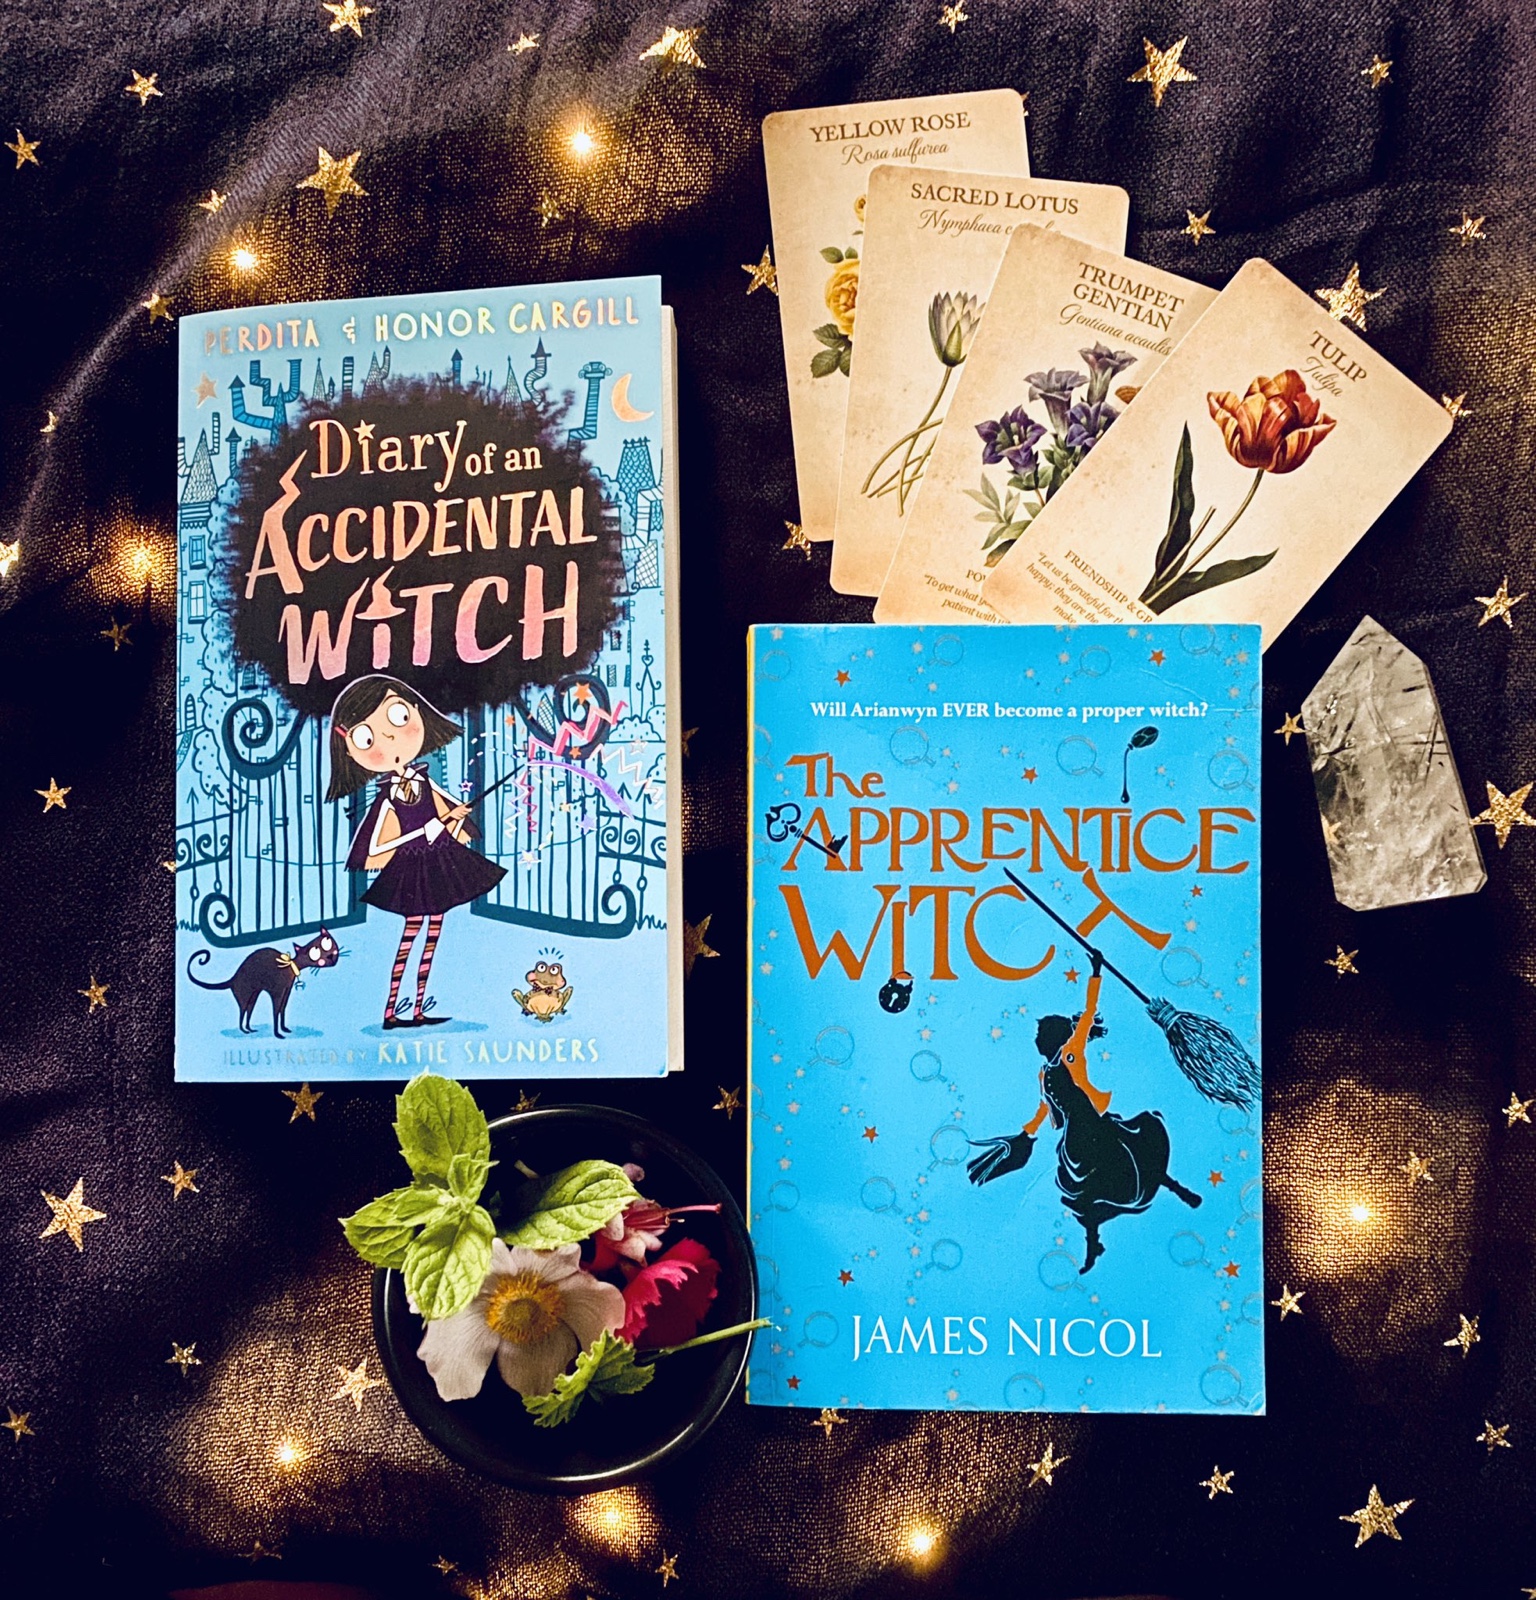 Diary of an accidental witch by Honor and perdita cargill